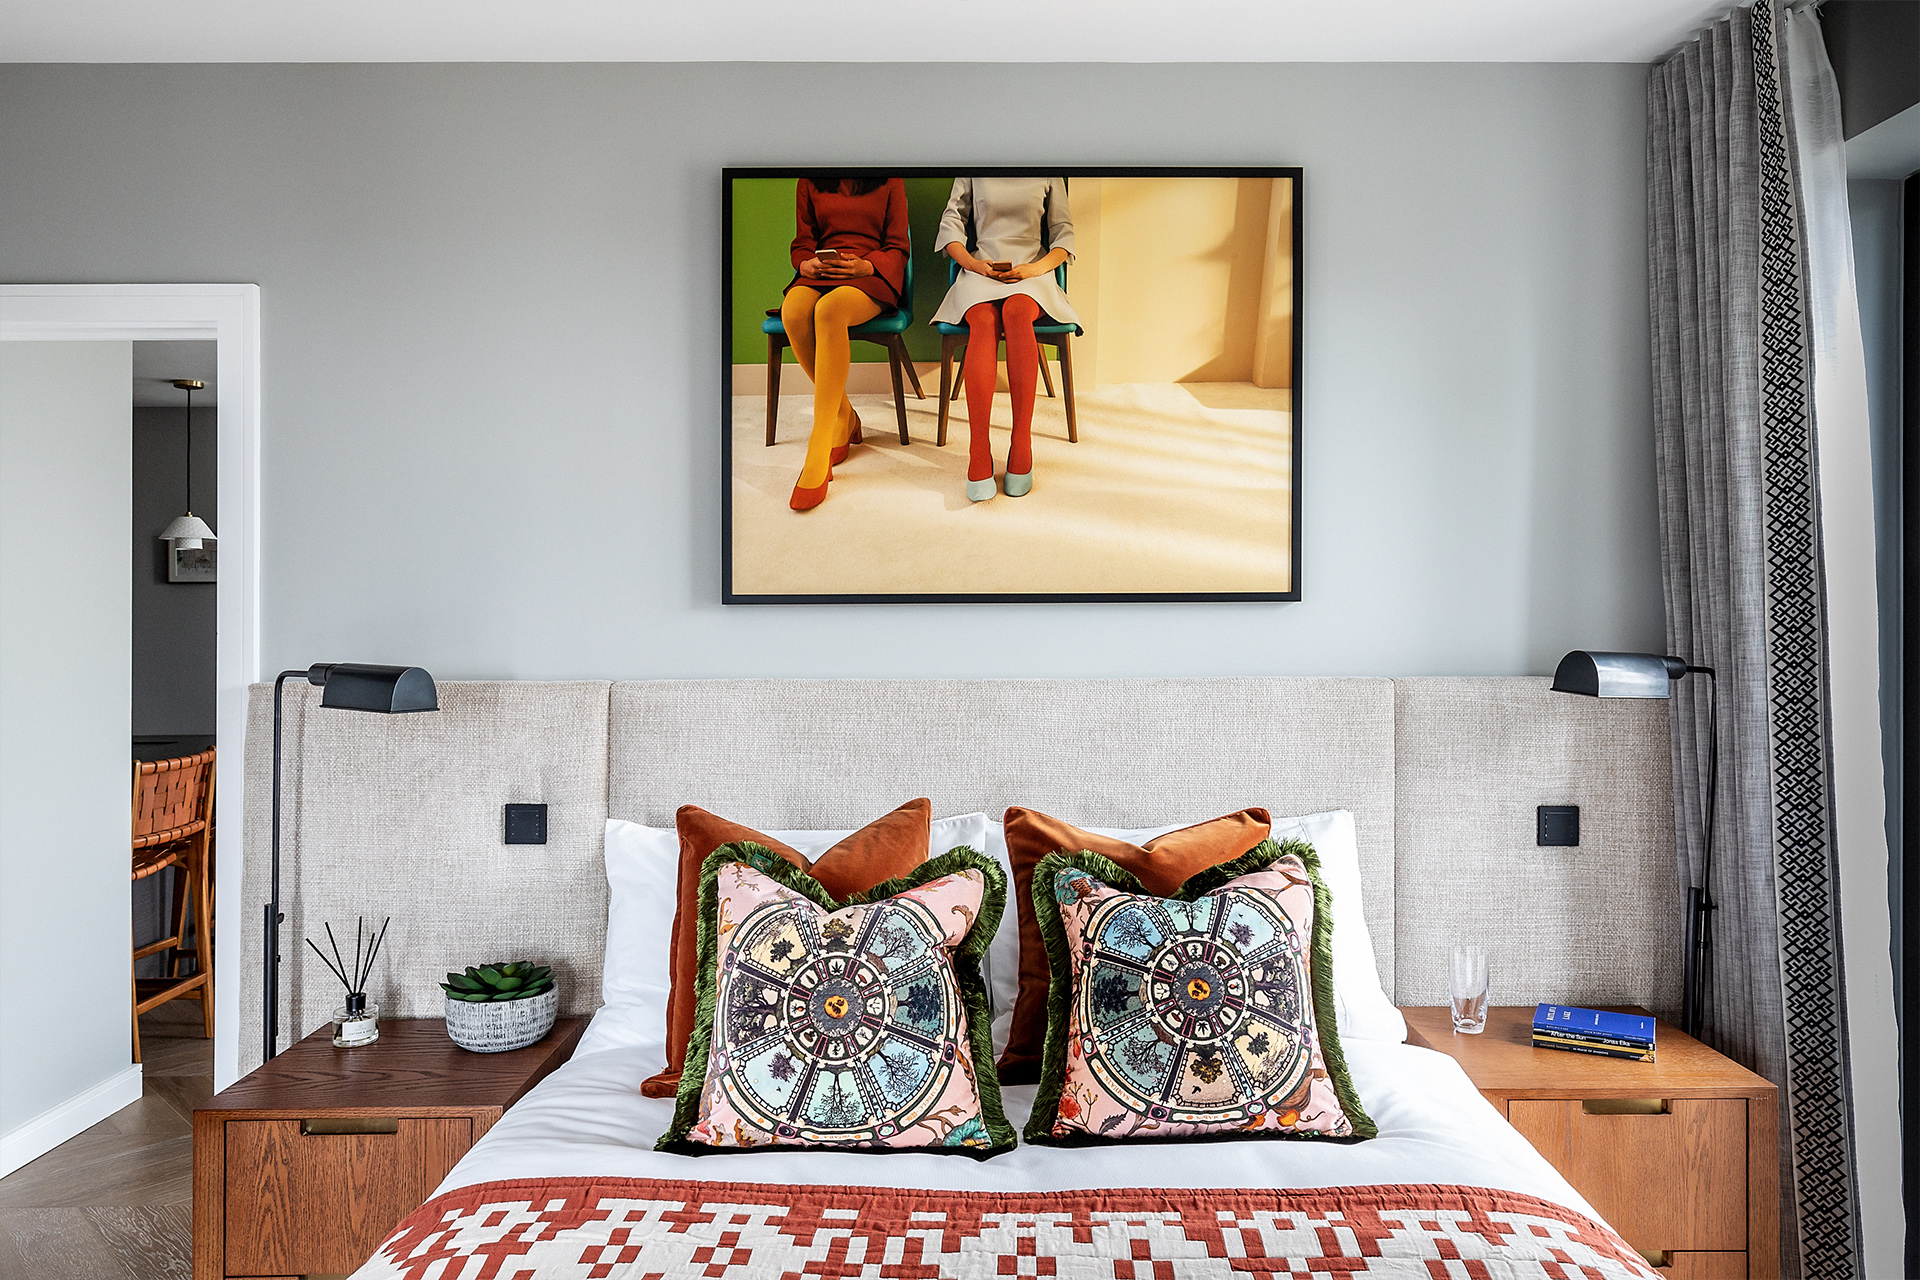 101 on Cleveland | Colourful bedding, cushions and art pop from background | Angel O'Donnell